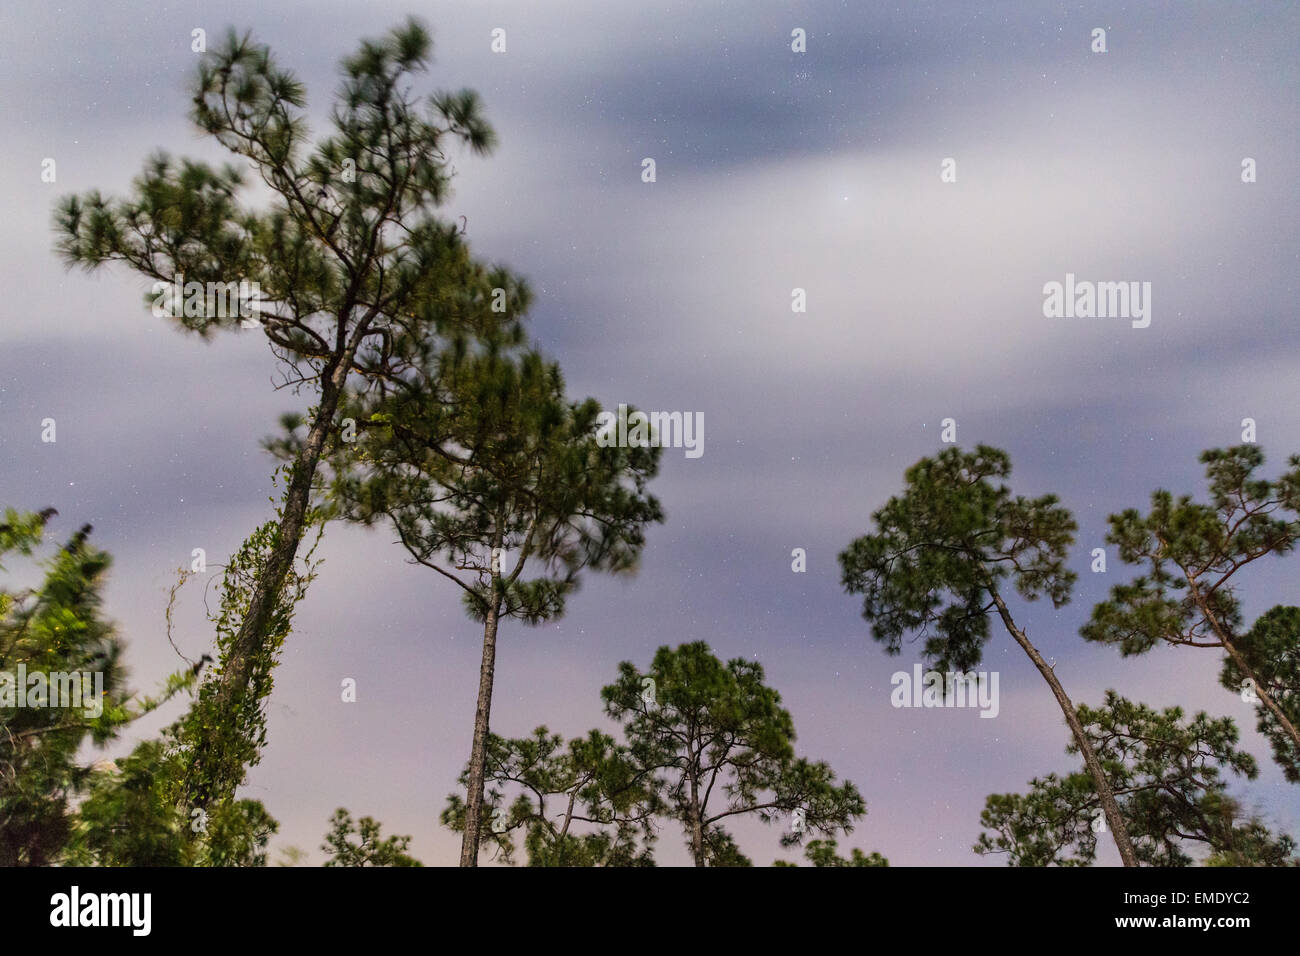 Pine trees reach towards the nighttime sky at Long Pine Key in the Florida Everglades National Park. Stock Photo